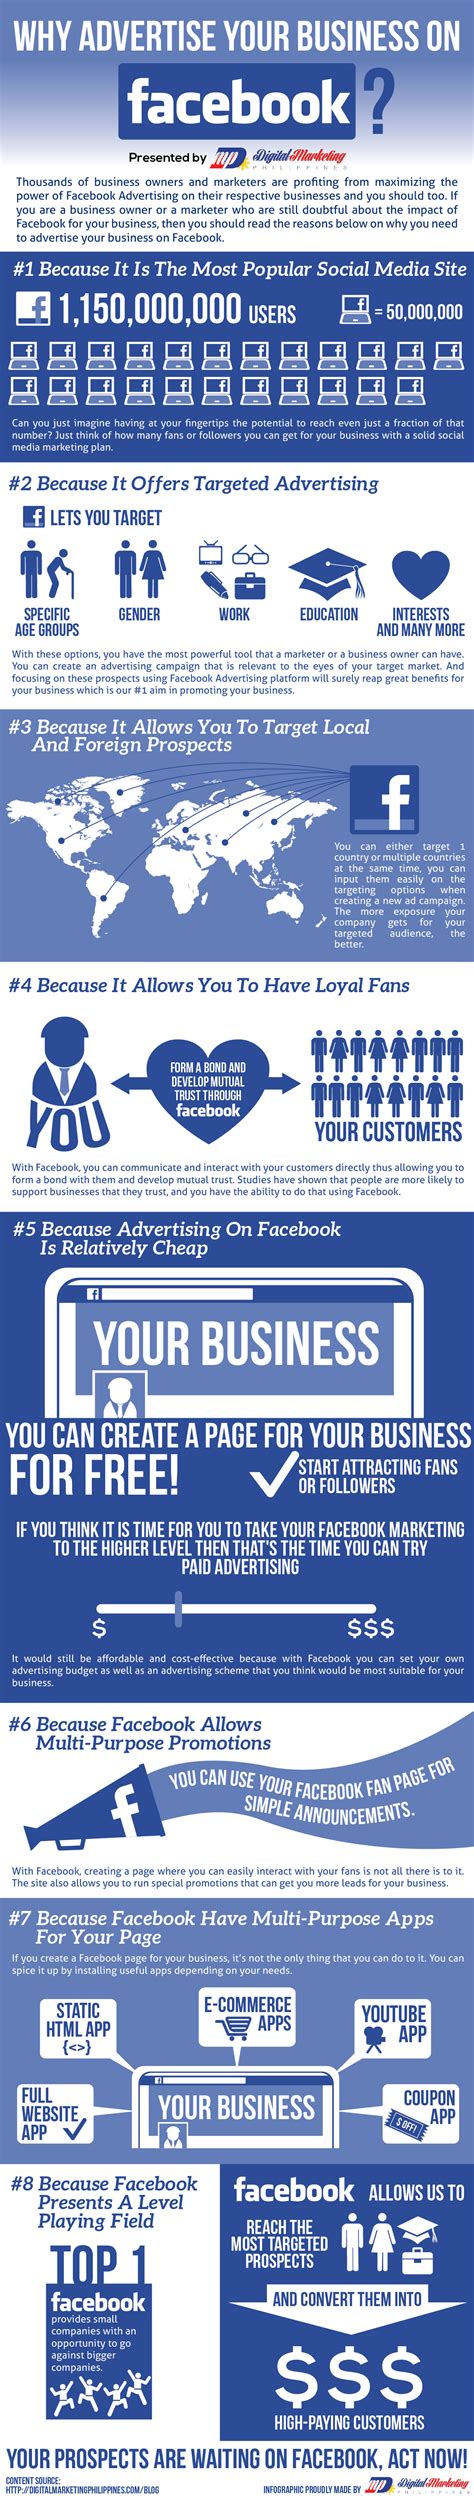 Why Advertise Your Business On Facebook Infographic